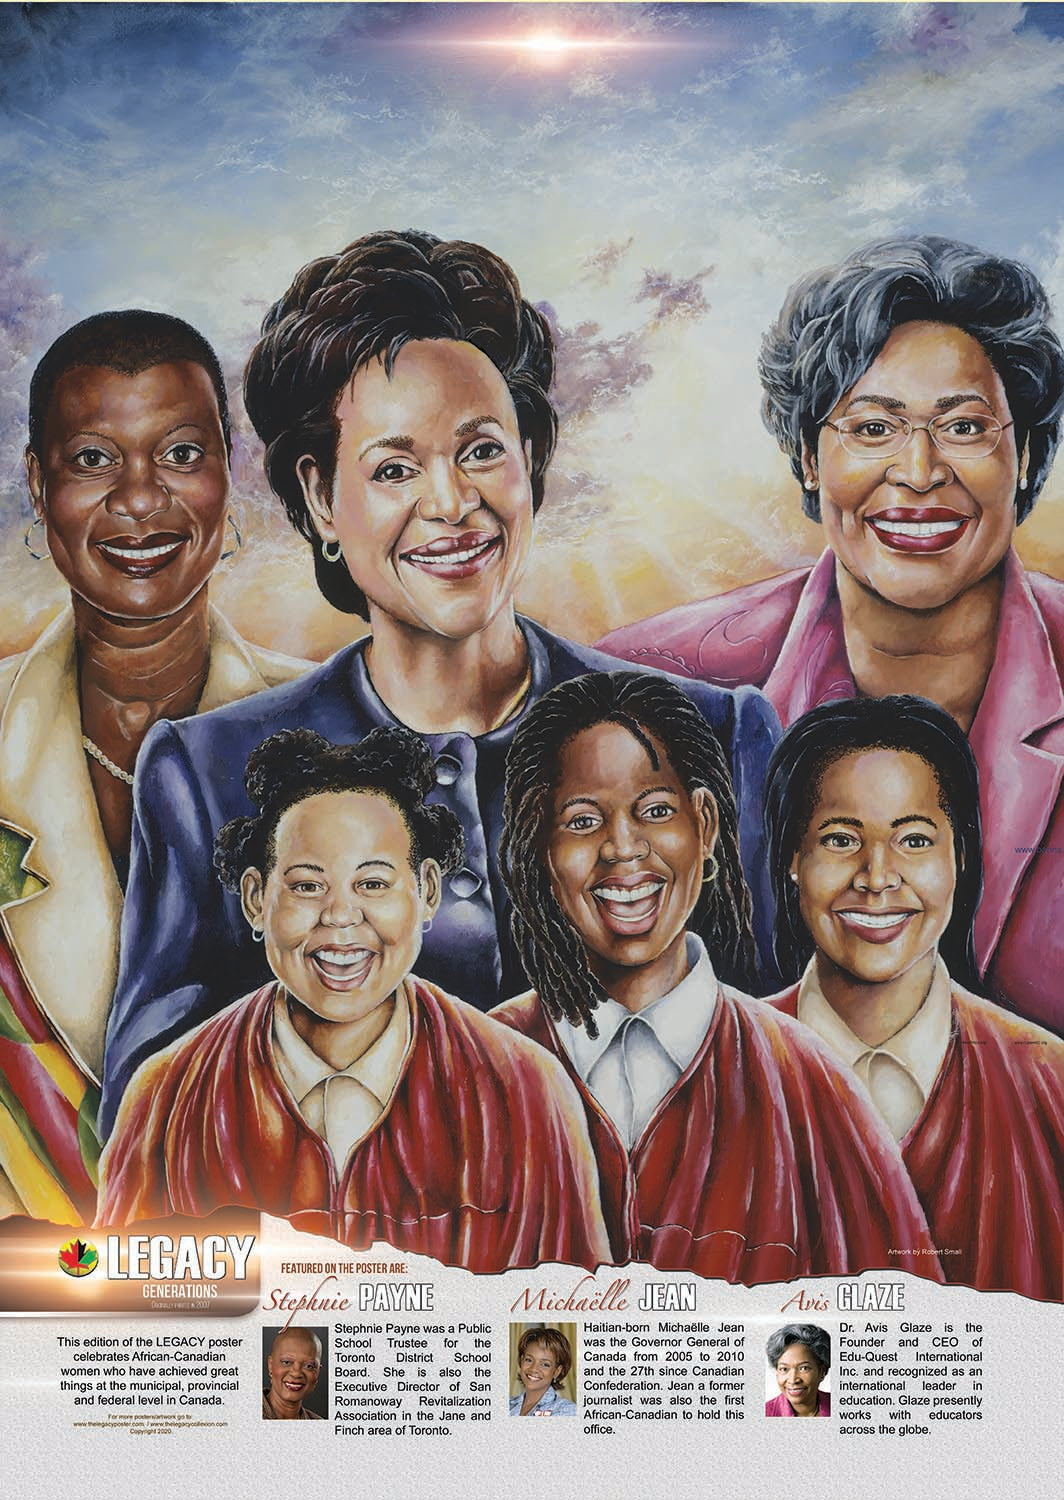 “An educational poster, ideal for Black History Month featuring TDSB school board trustee and community activist Stephnie Payne, former Governor General Michaelle Jean, and former Director of the York Region District School Board and global educator, Dr. Avis Glaze created by African-Canadian artist Robert Small.”